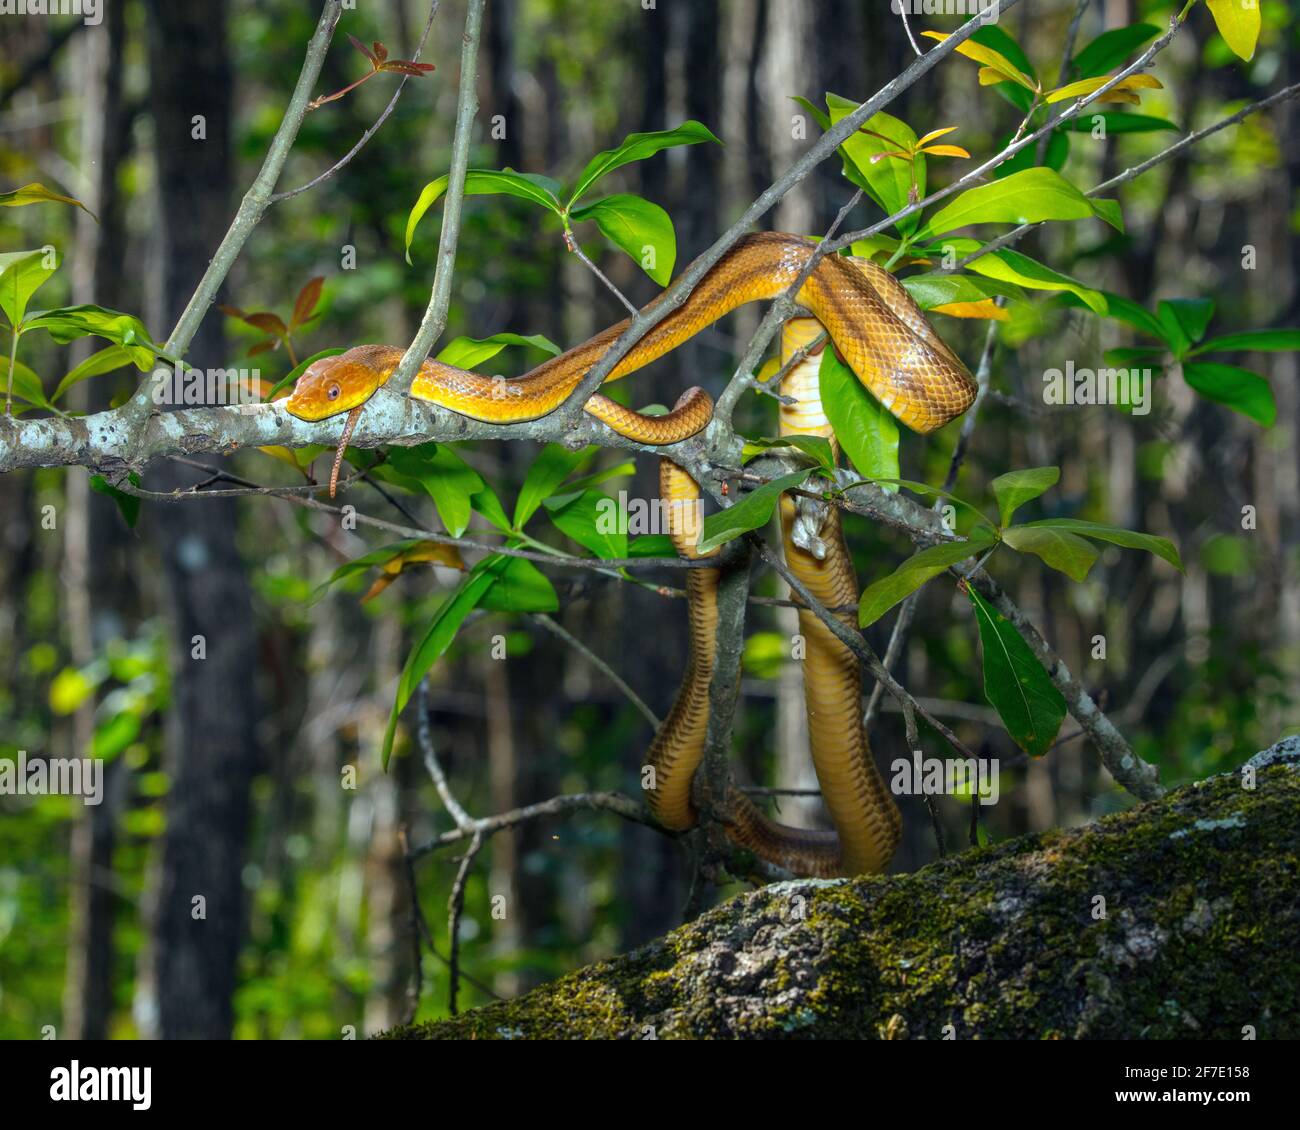 A yellow eastern rat snake, Pantherophis alleghaniensis, forages in a swamp. Stock Photo